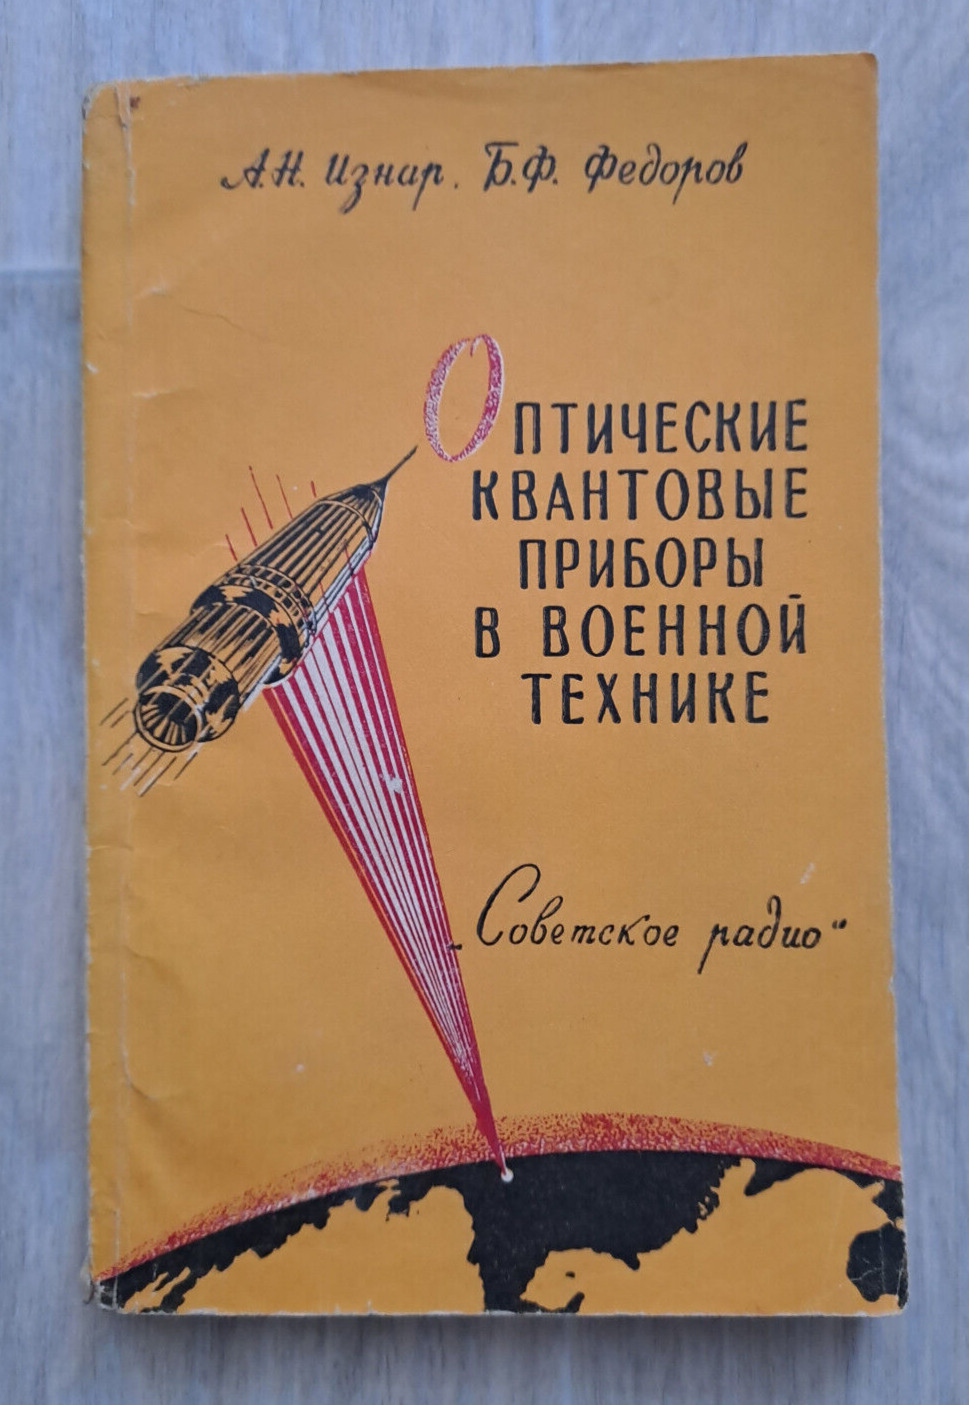 1964 Optical quantum devices in military technology lasers Rocket Russian book